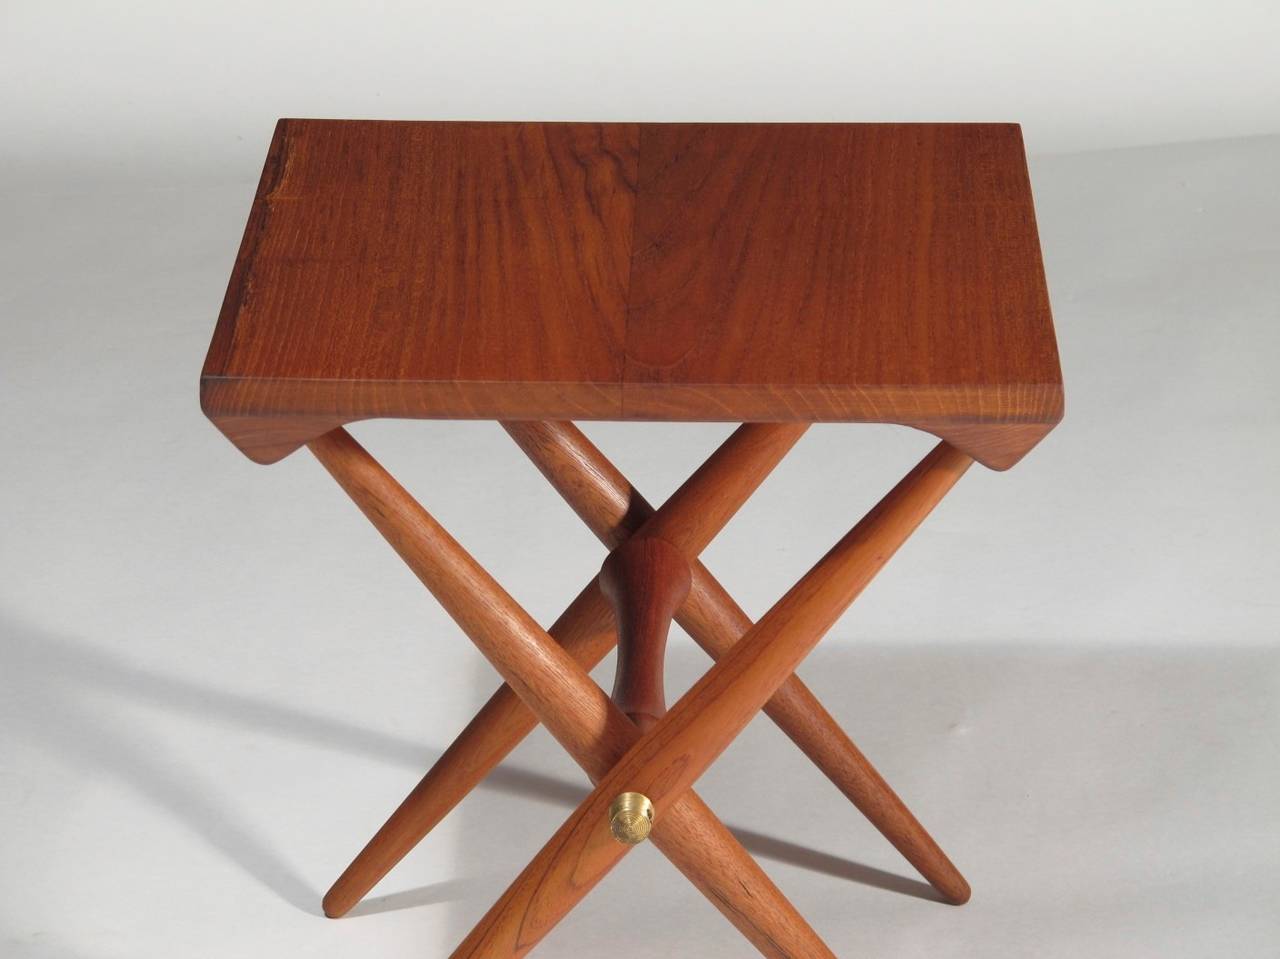 Hand-Crafted Jens Quistgaard Side Table